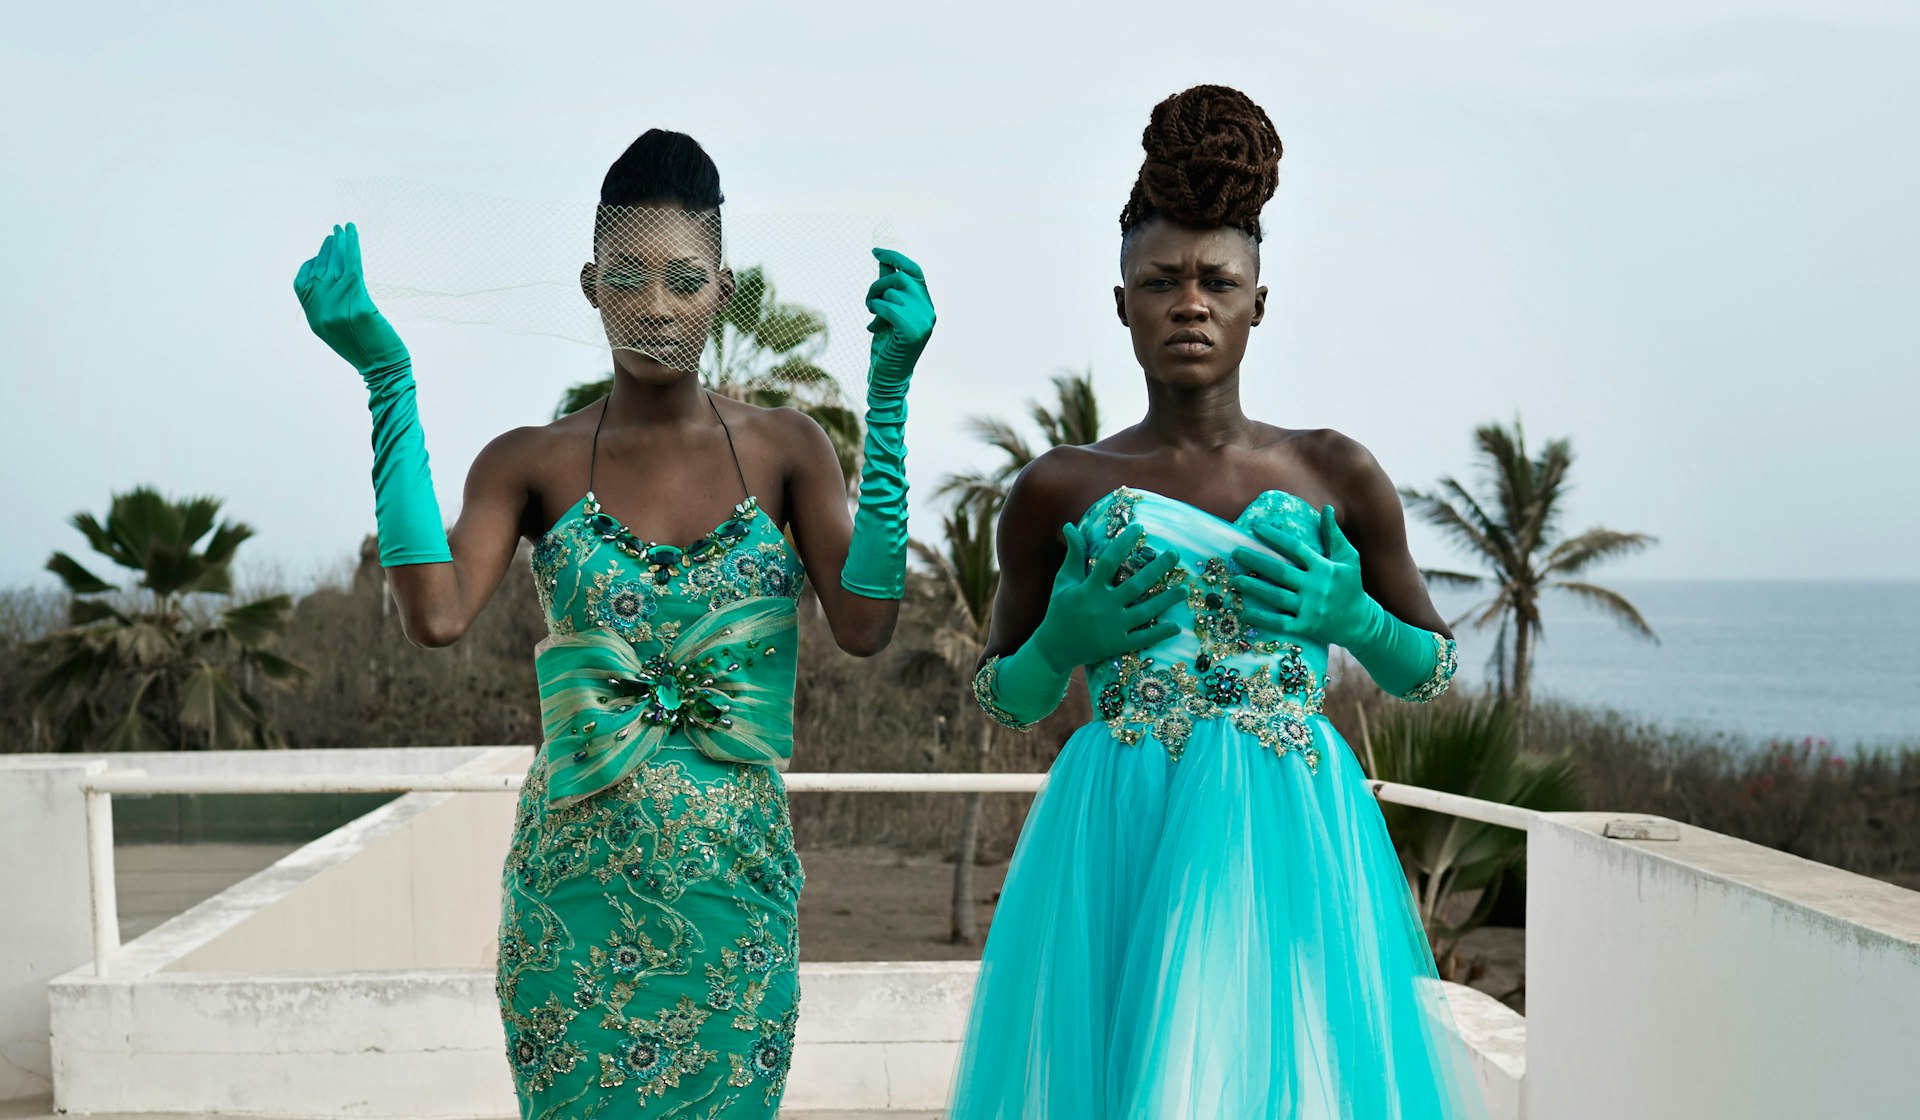 This is what Africa's fashion renaissance looks like...